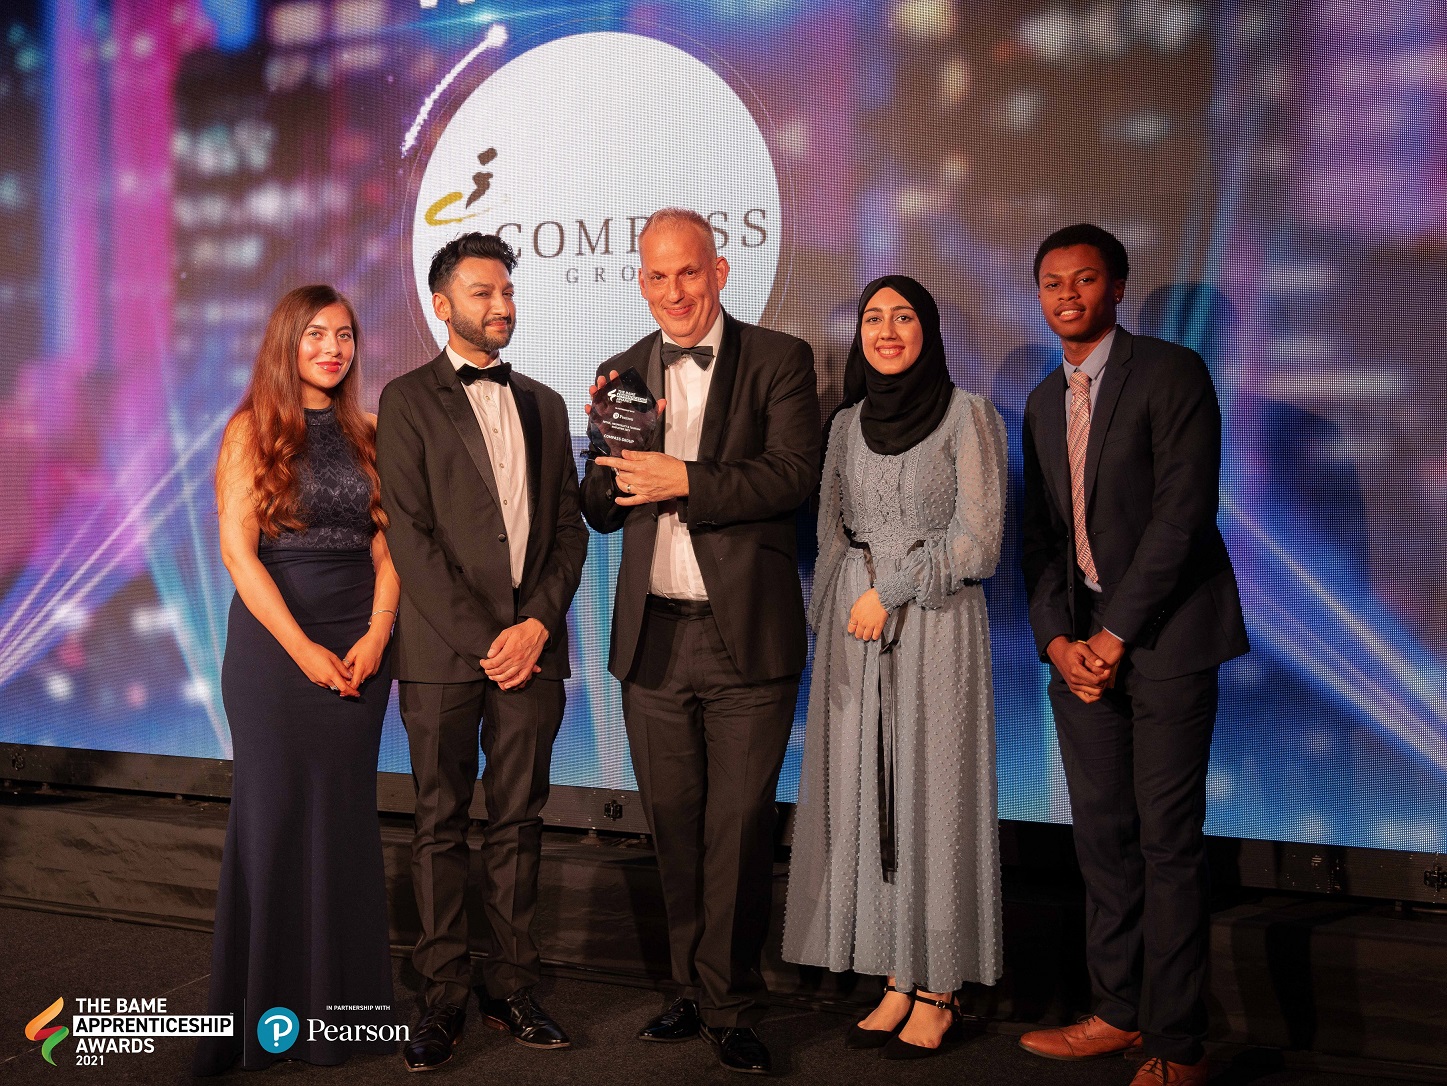 Compass Group Wins at BAME Apprenticeship Awards